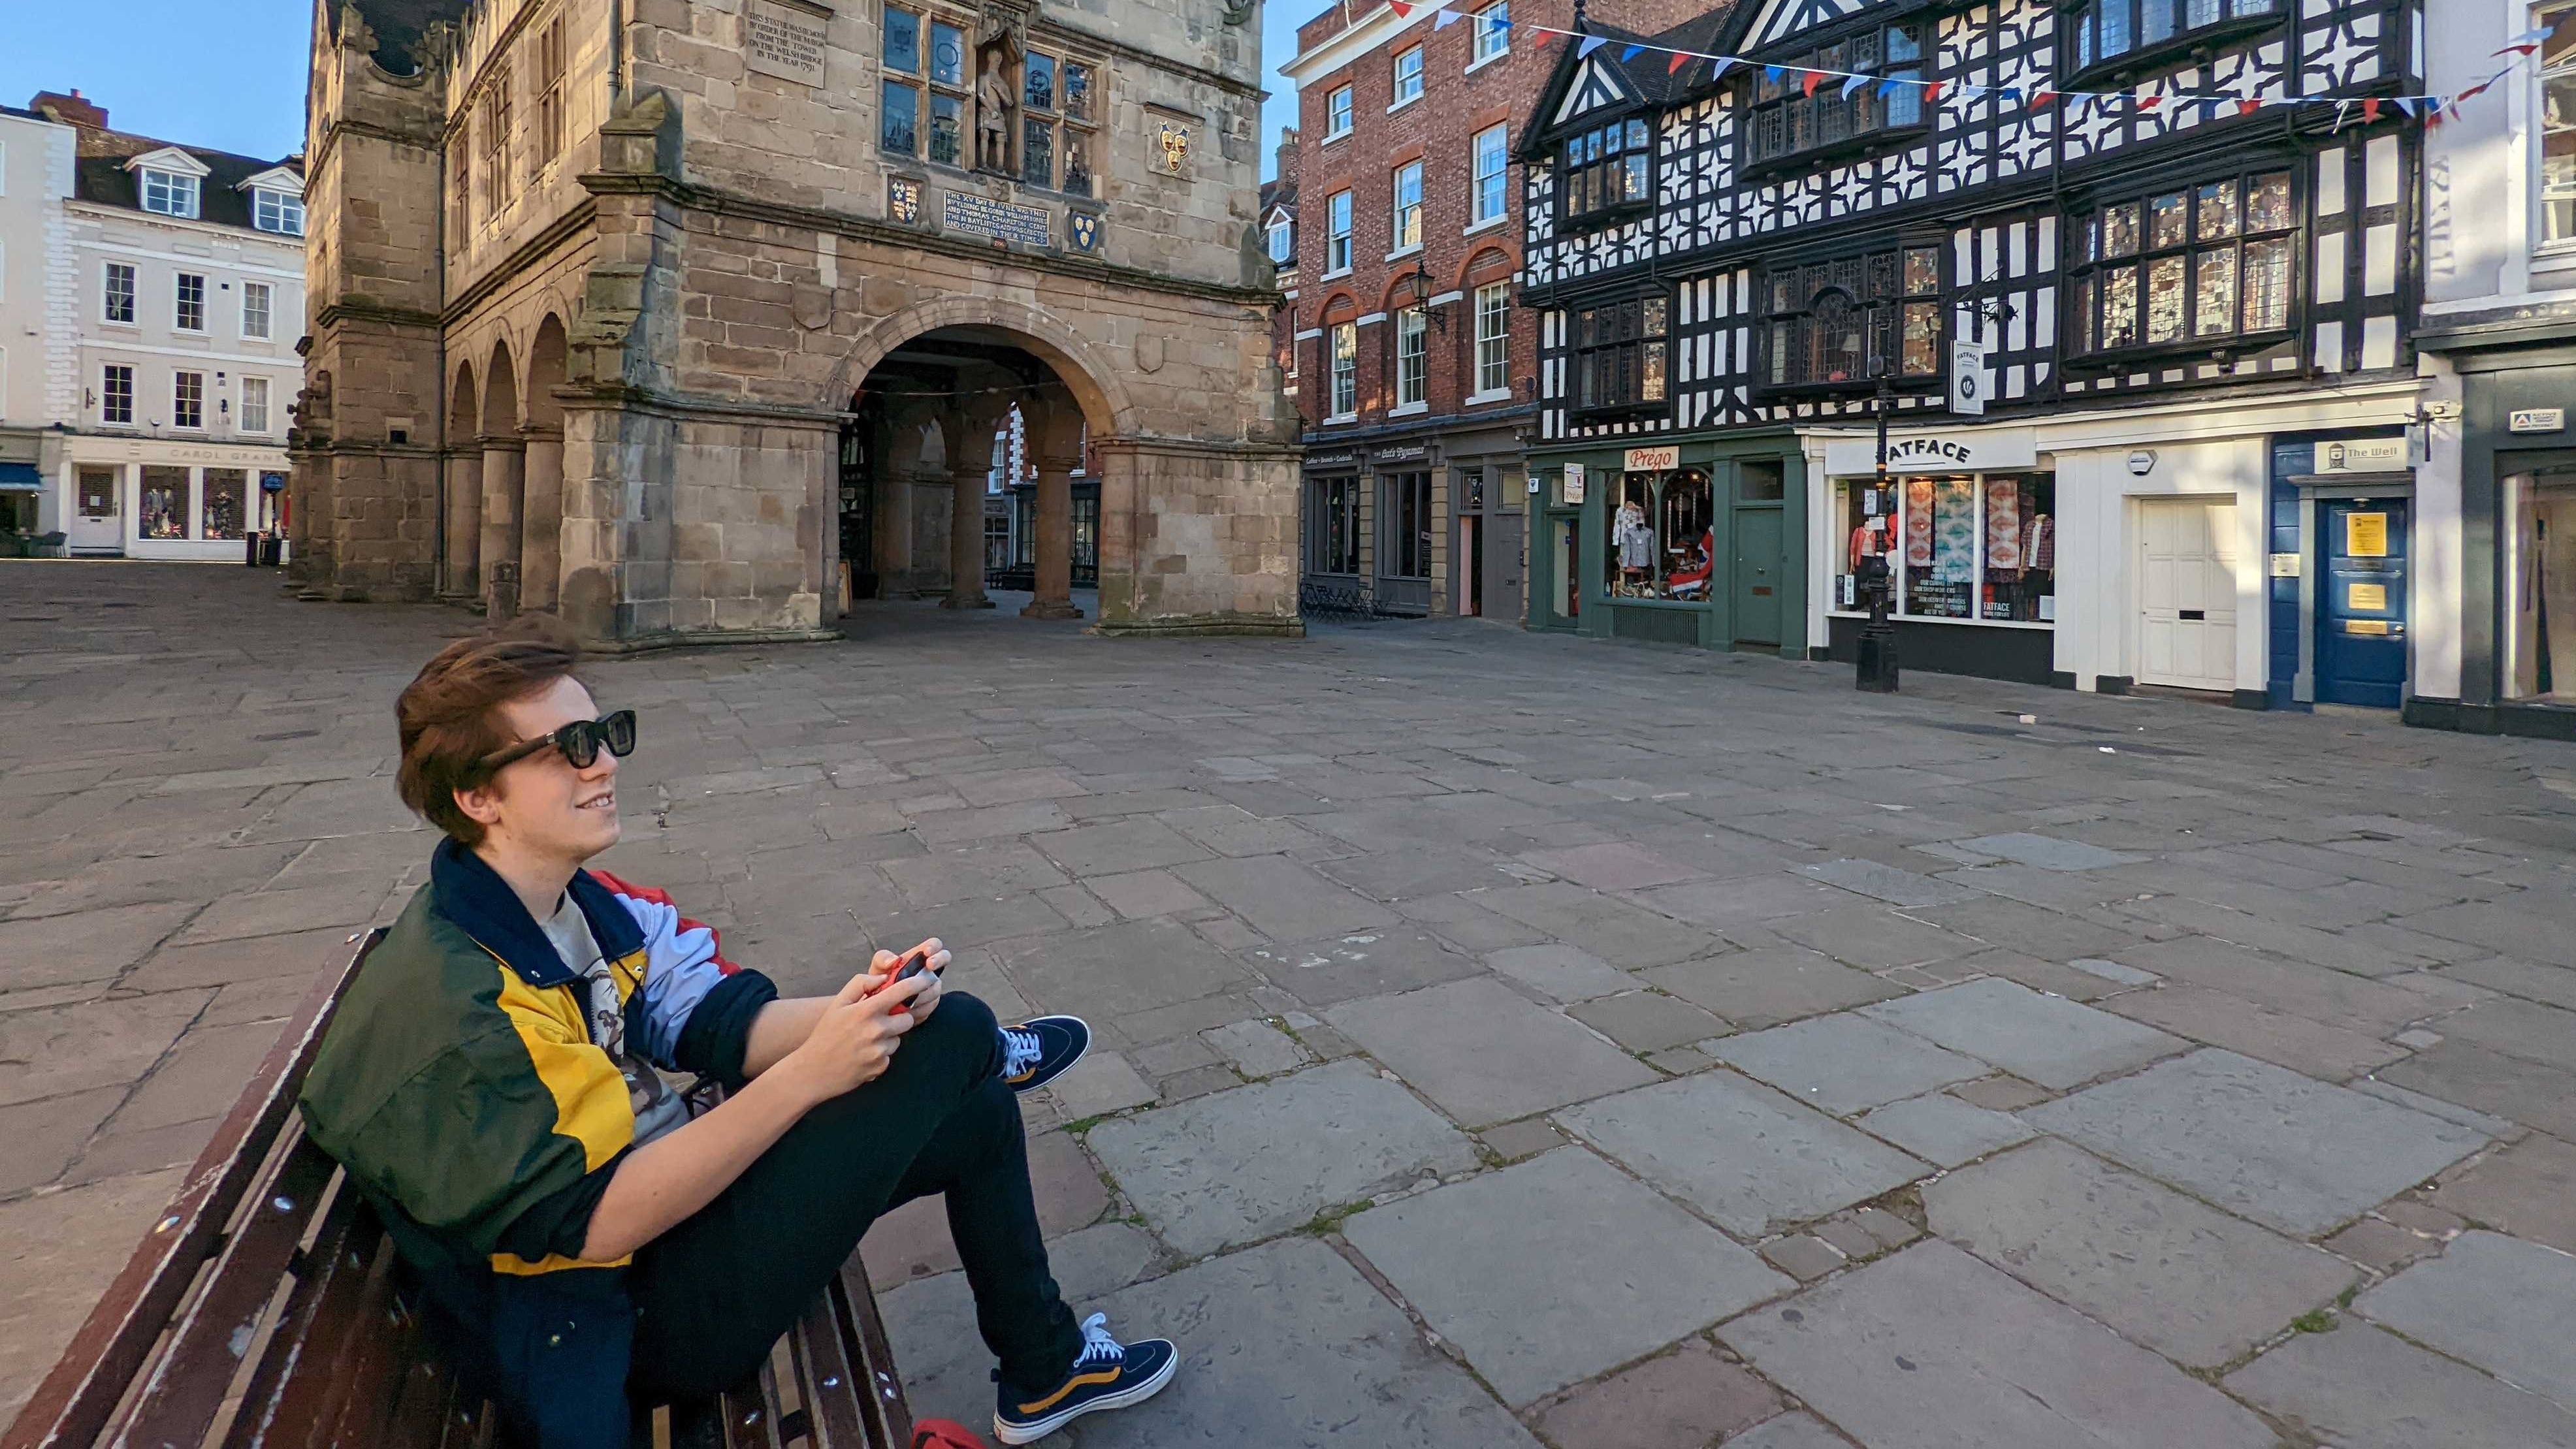 Our reviewer trying out the Xreal Air AR Glasses while sat on a bench in front of an old-looking stone building